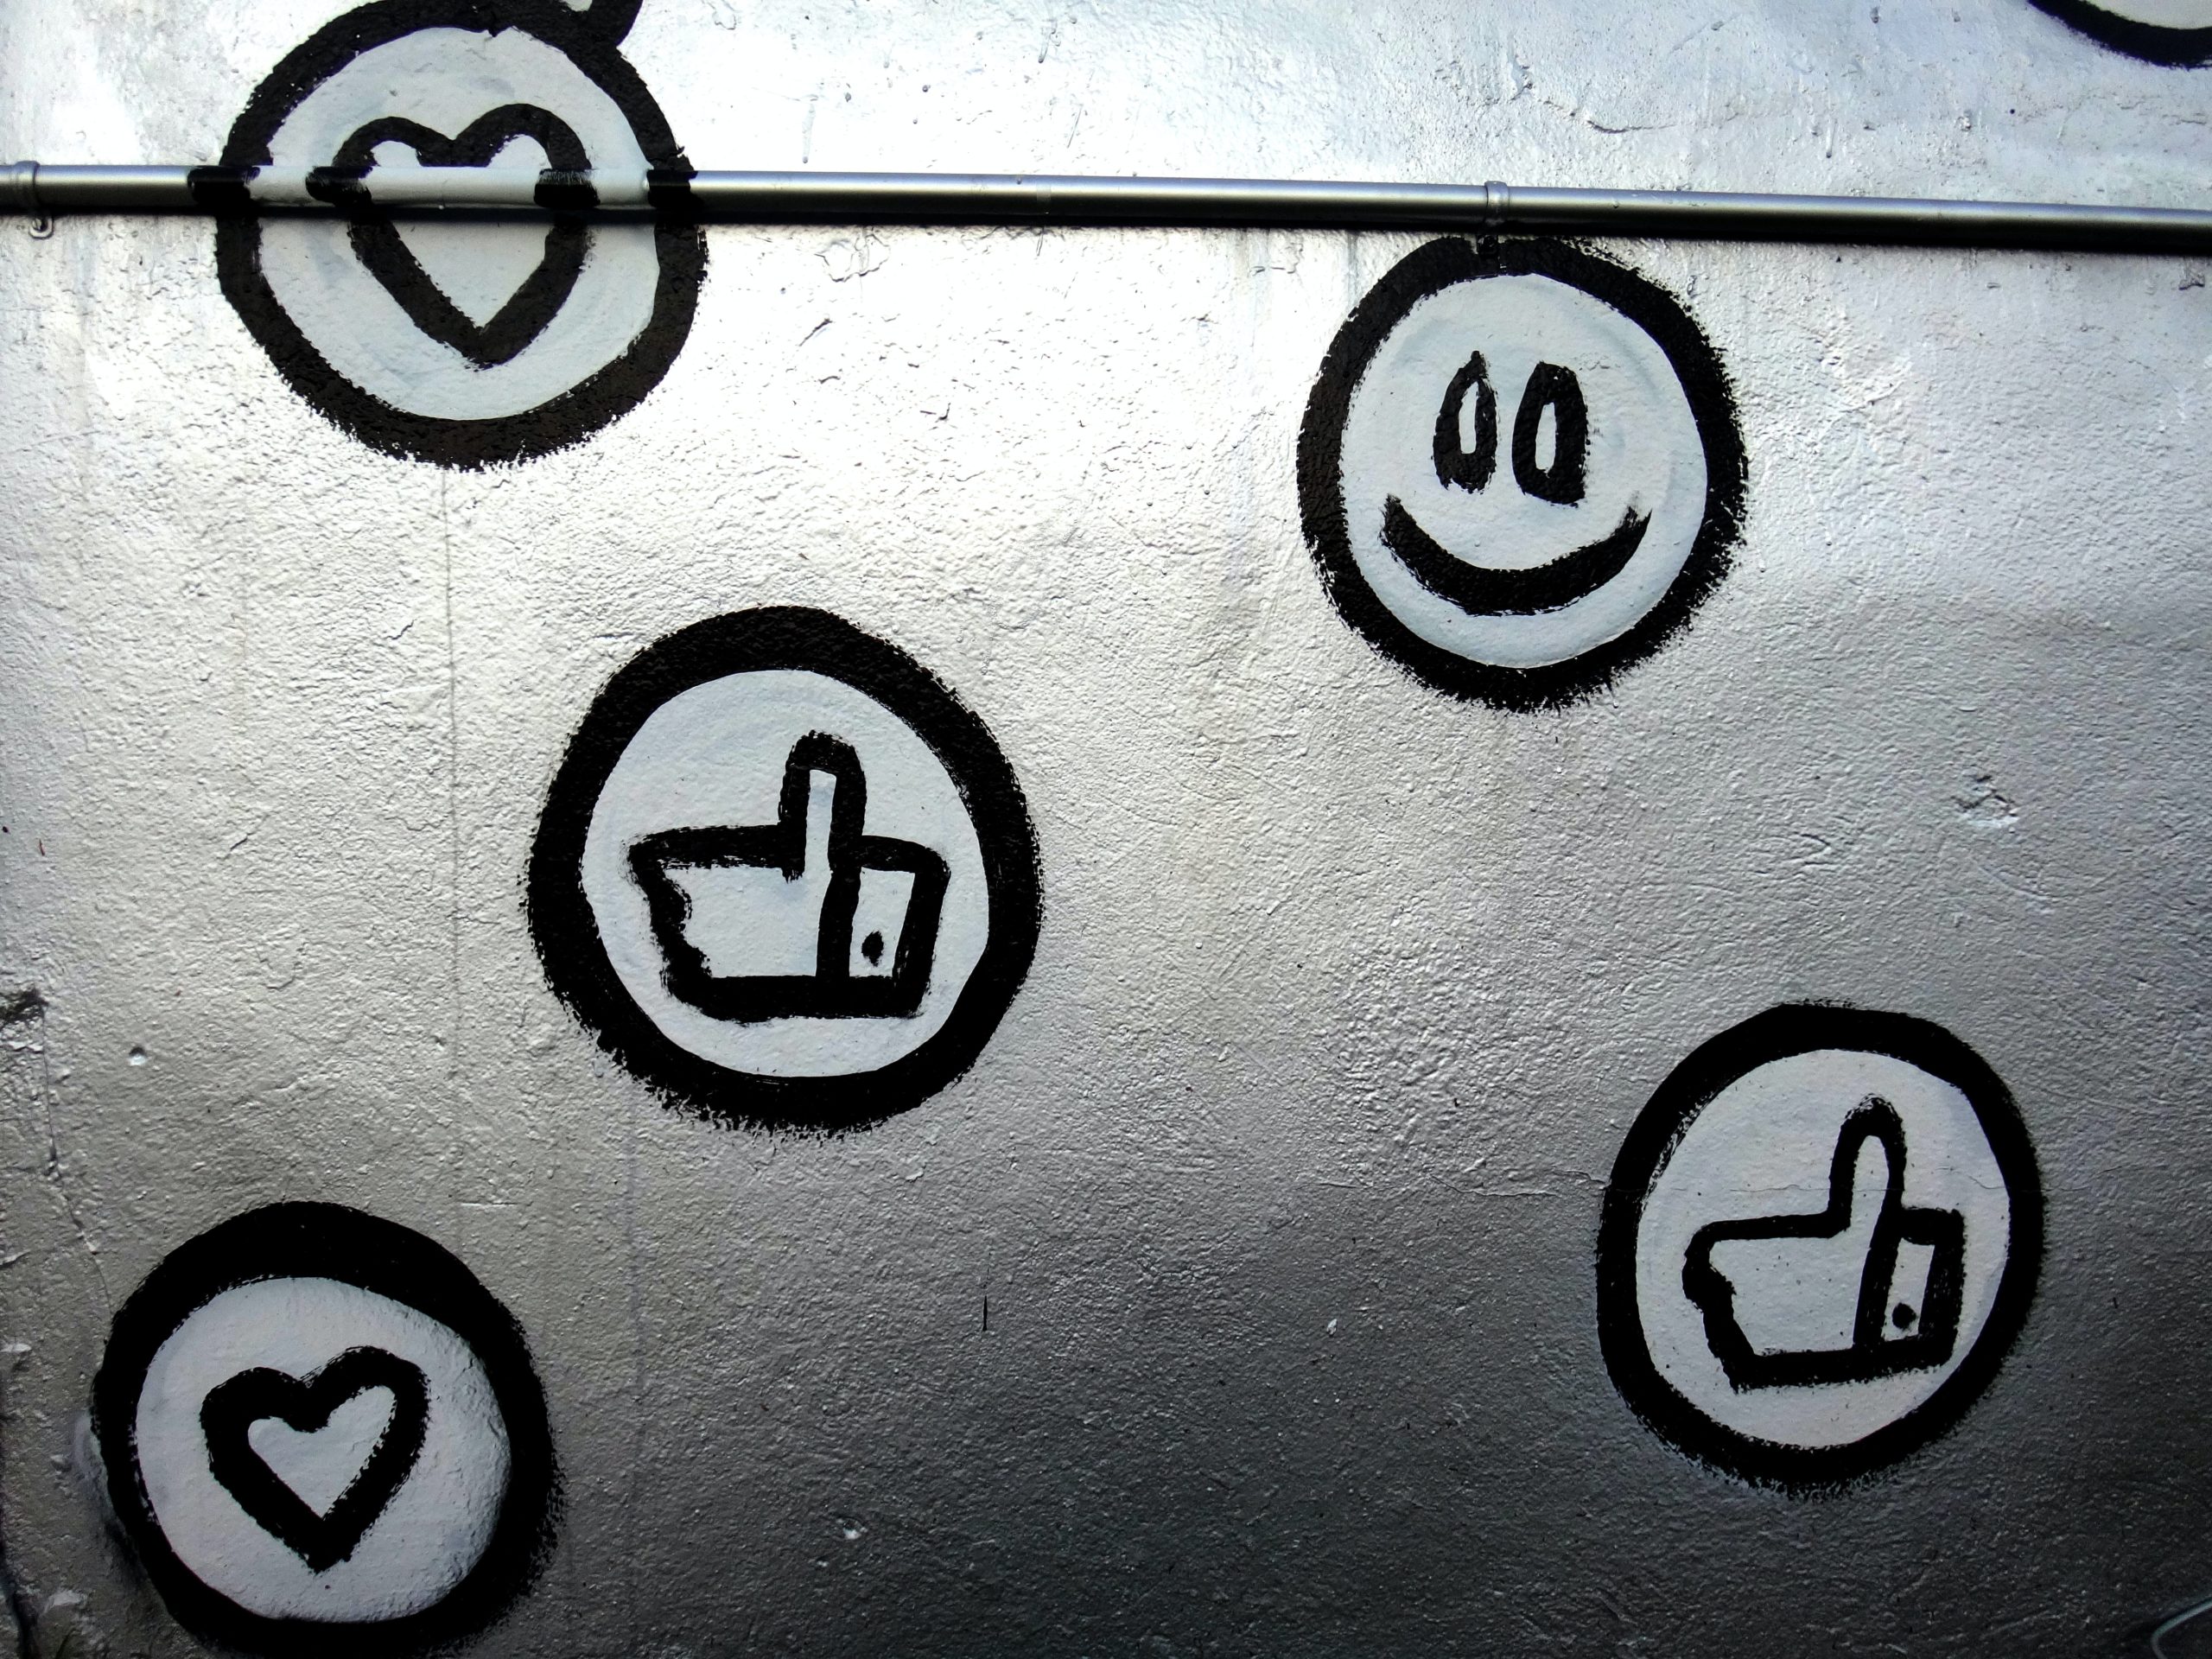 A decorative image of a smiley face and social media reaction buttons, such as a like and heart, spray painted onto a wall.